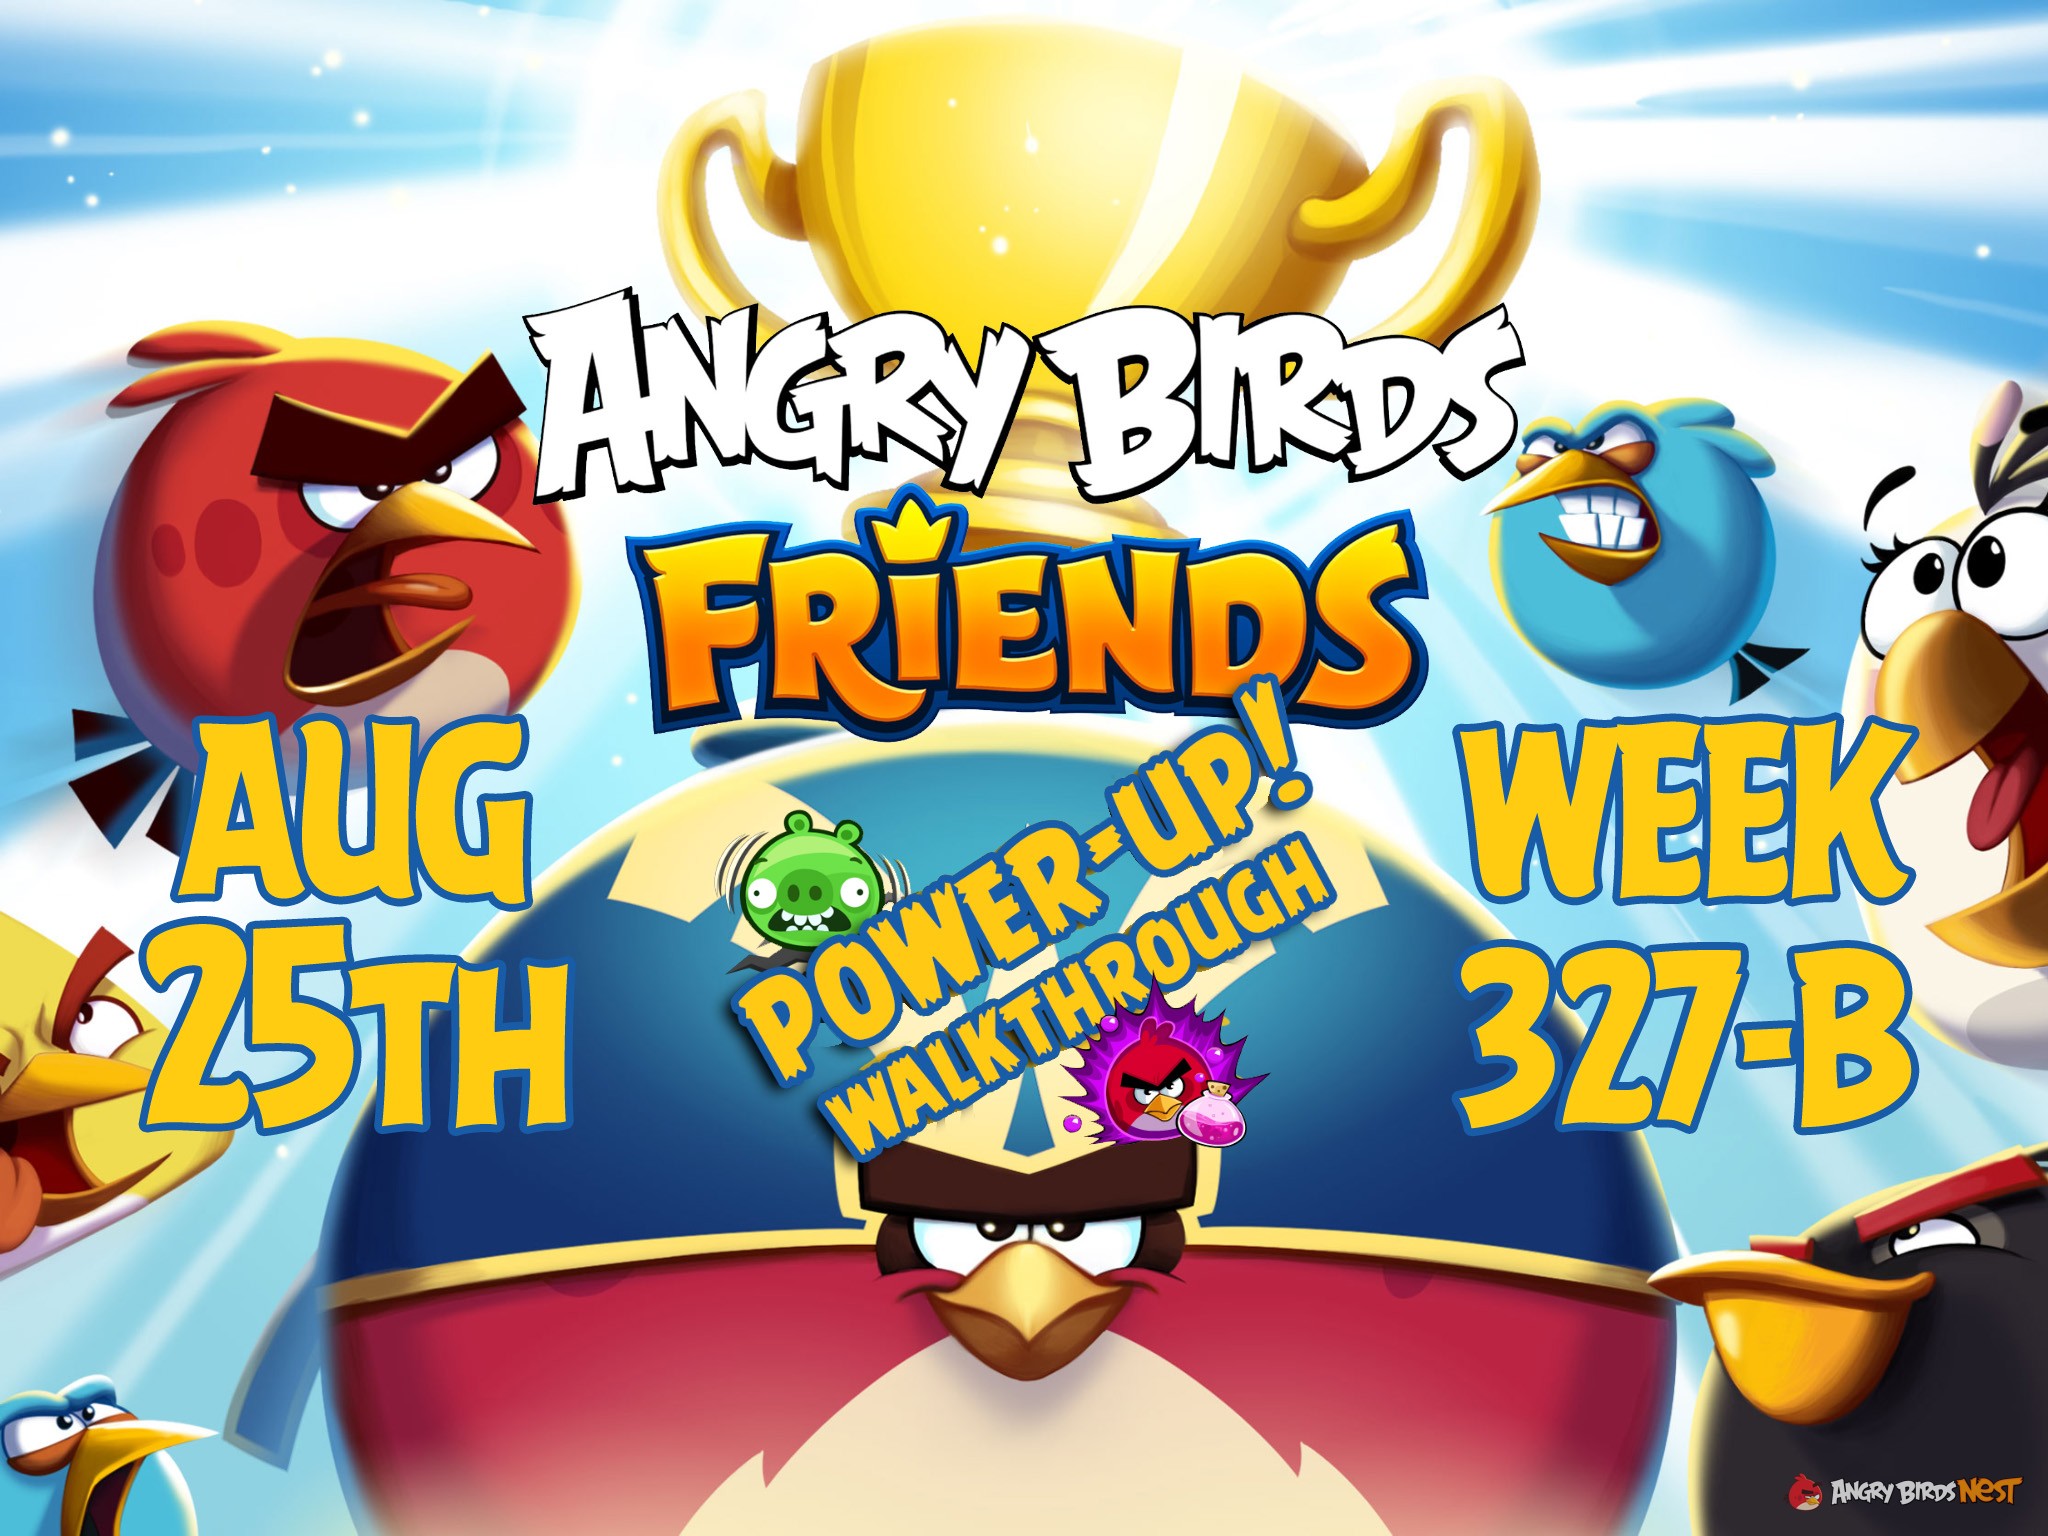 Angry-Birds-Friends-Tournament-Week-327-B-Feature-Image-PU